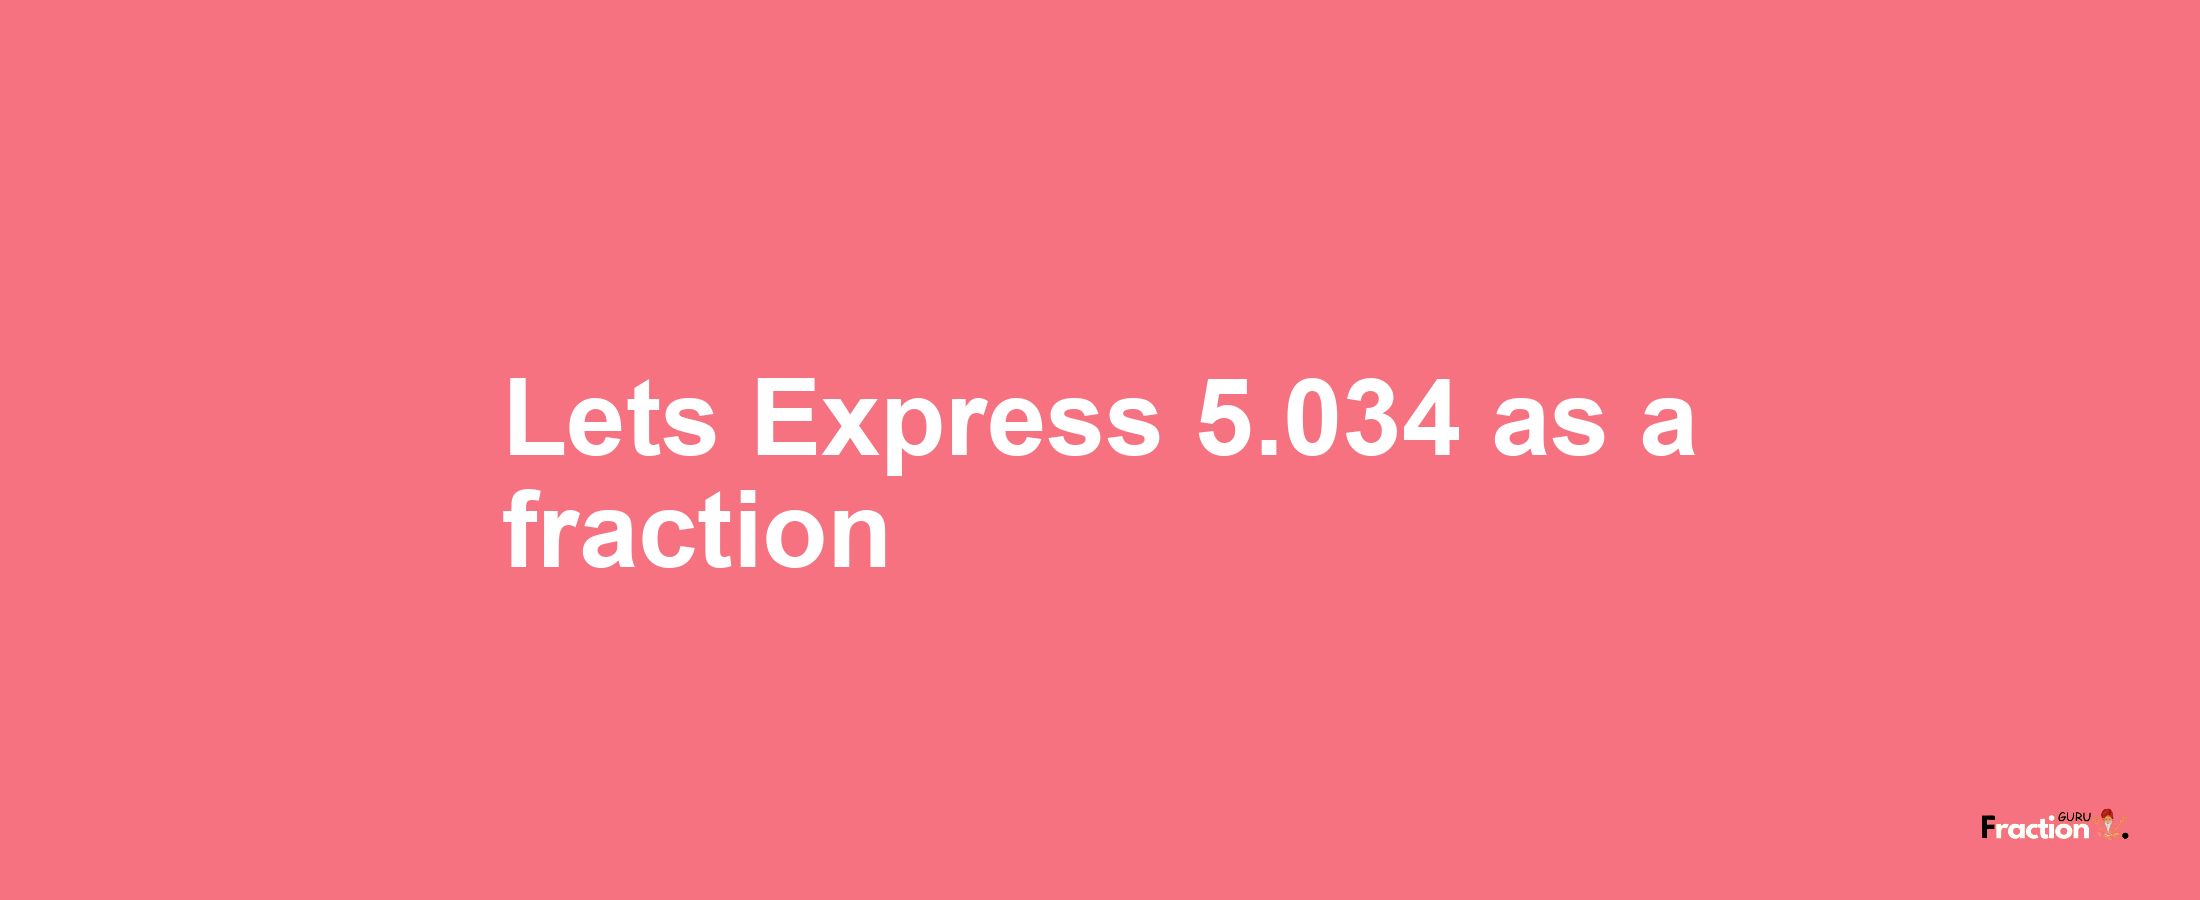 Lets Express 5.034 as afraction